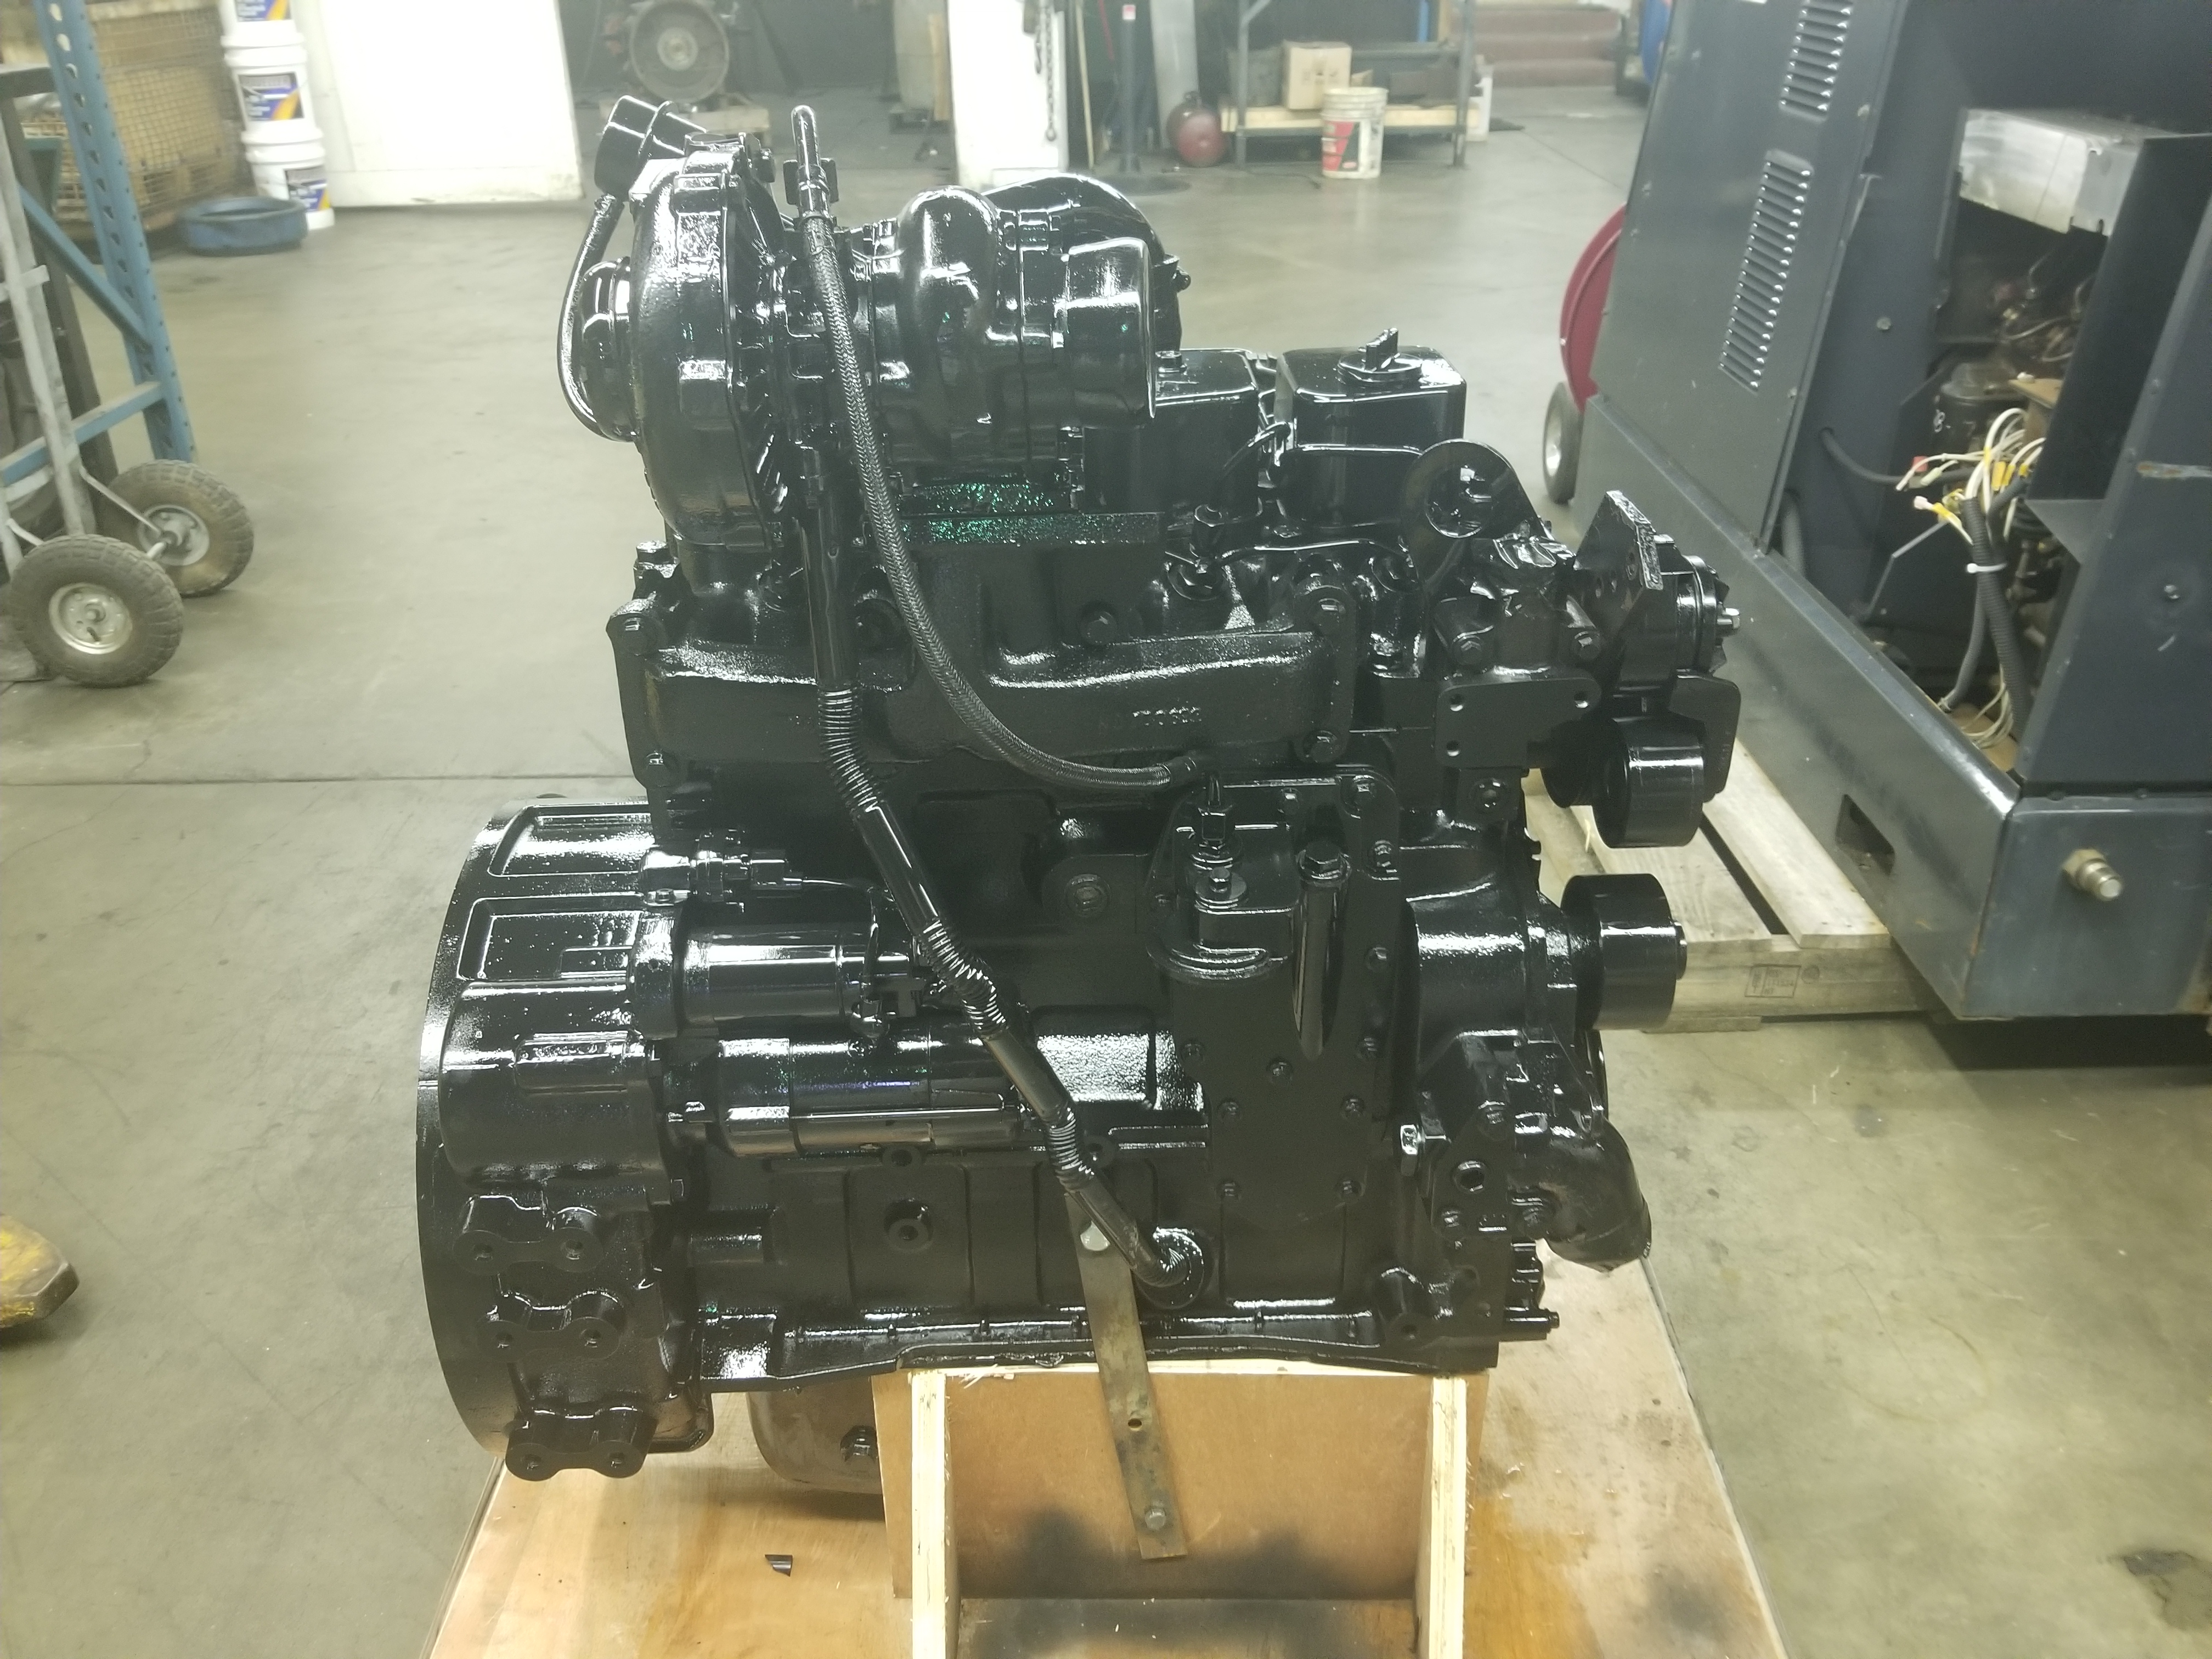 Cummins 4.5l rebuilt Diesel Engines For Sale Young and